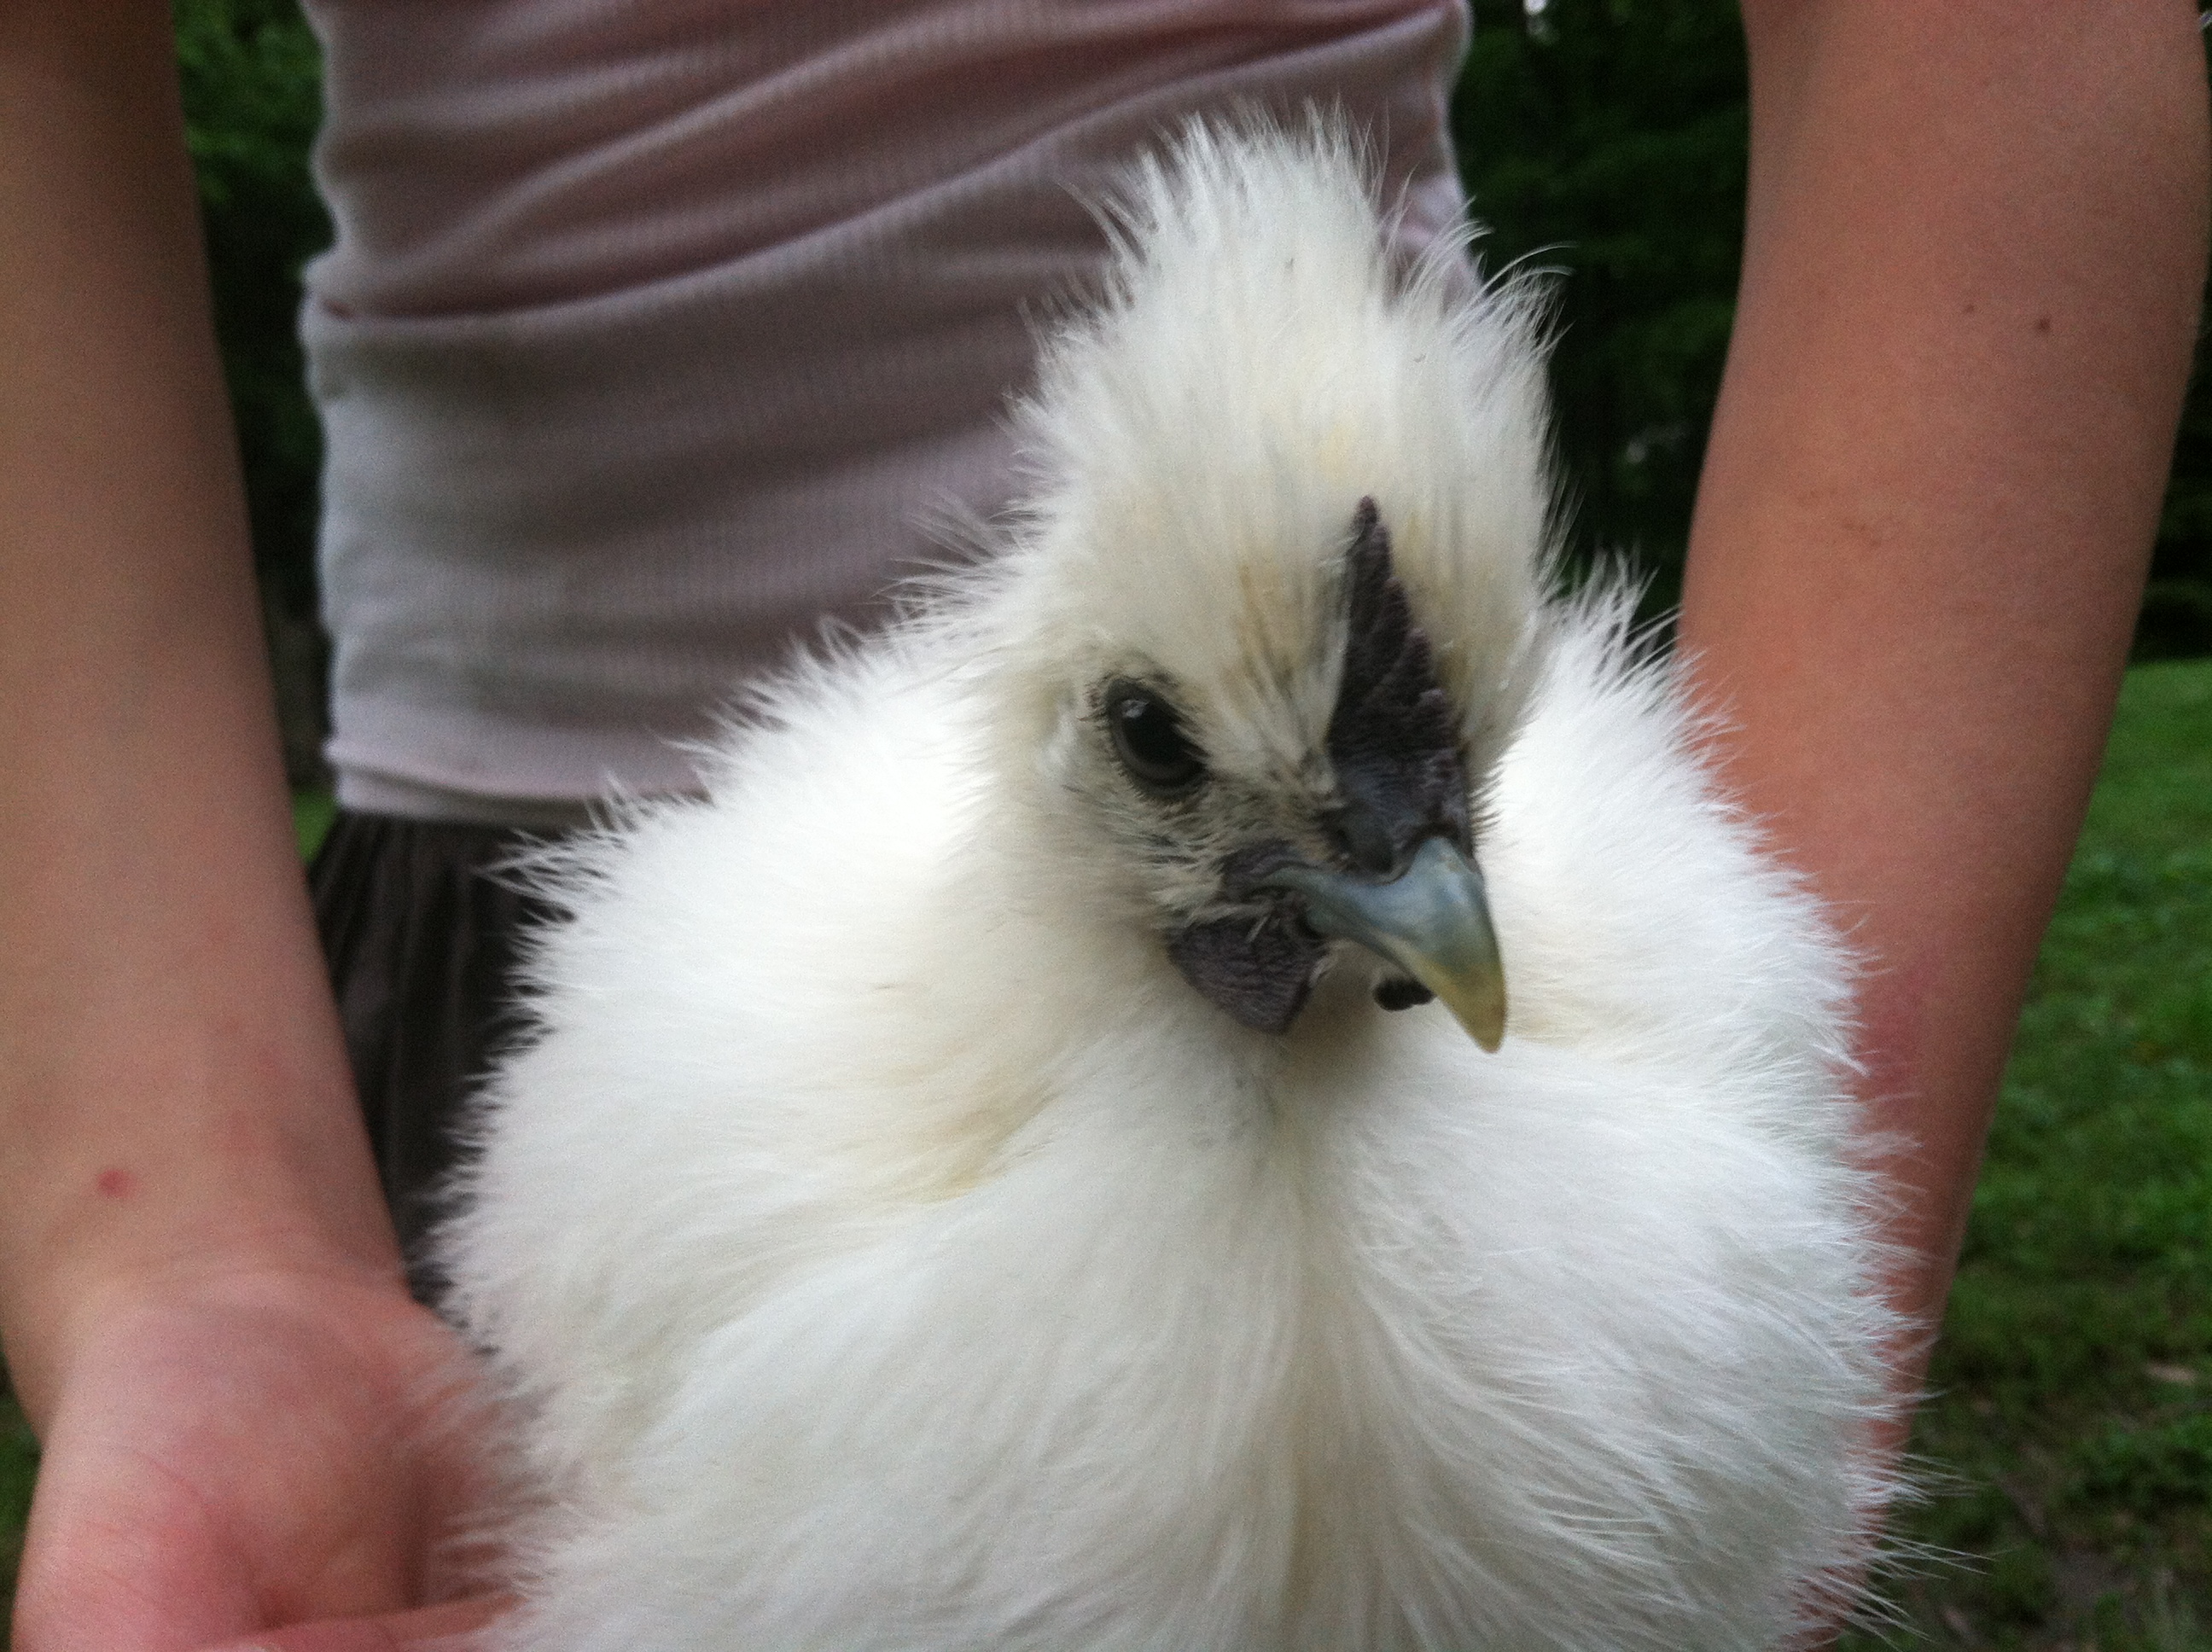 I have one silkie like this and I am thinking Roo